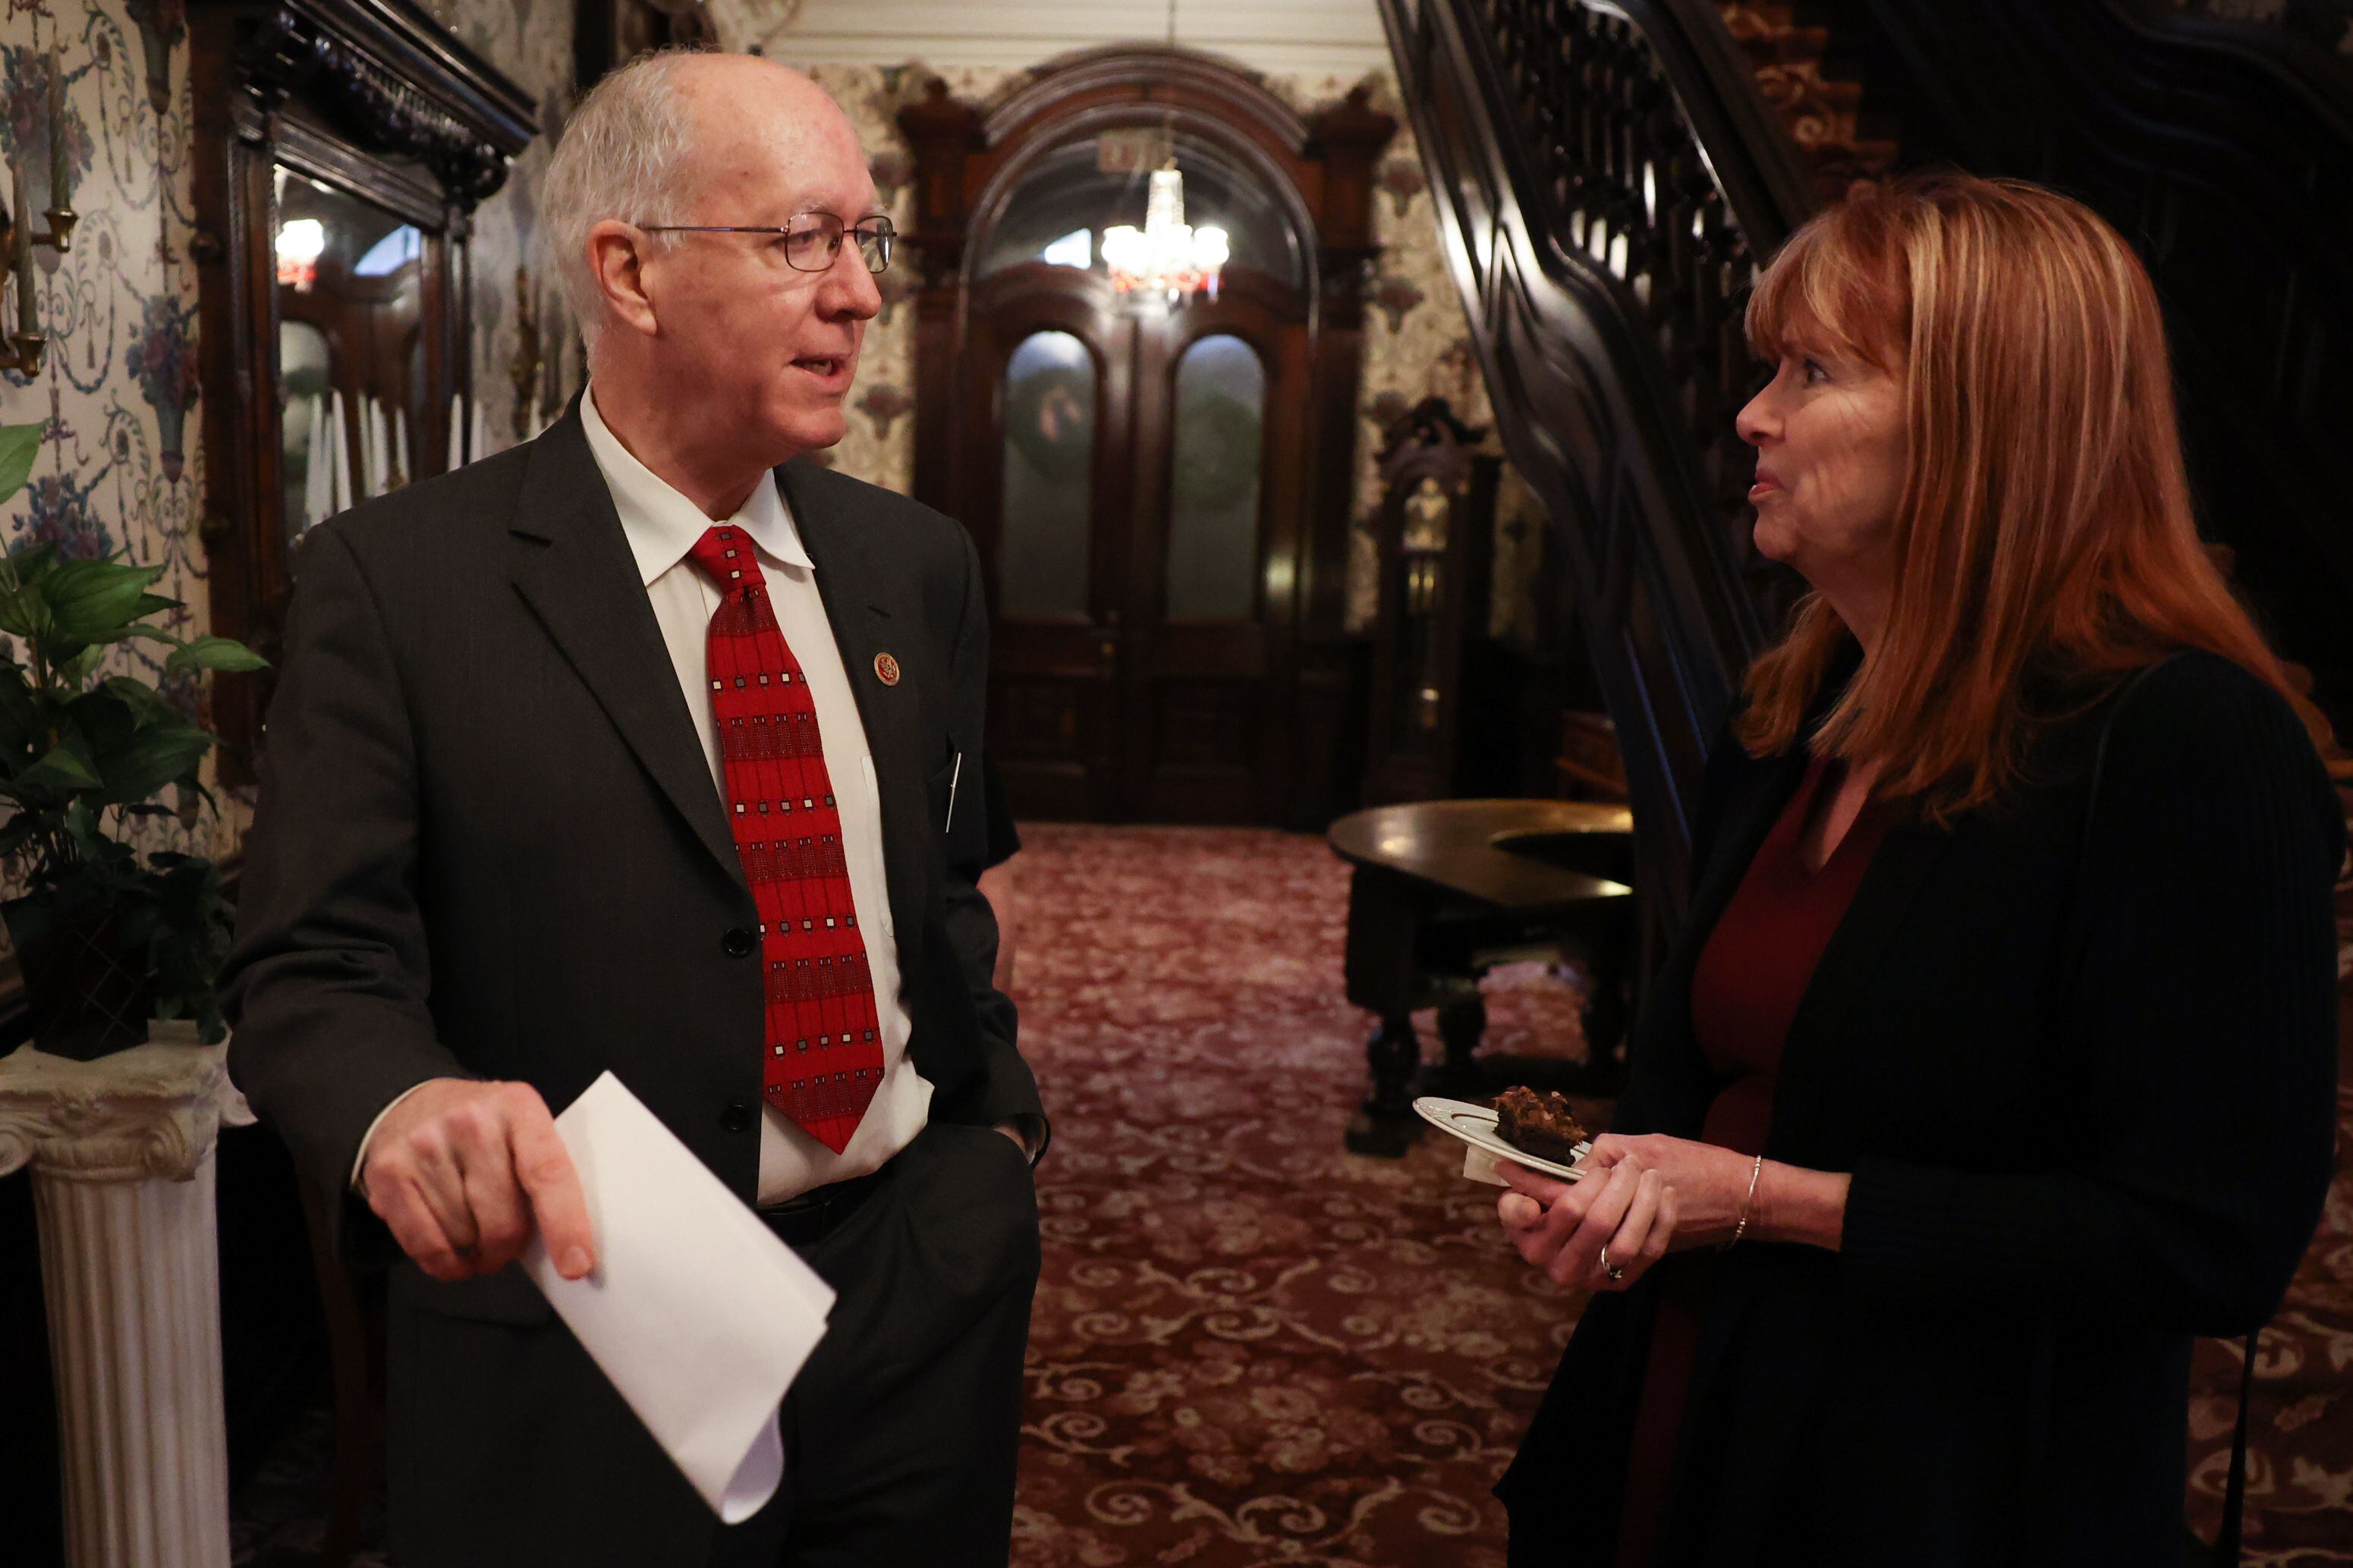 Congressman Bill Foster (D-Ill) talks with Dr. Kathy Burke, of the Will County Health Department, at a United Way private event where he presented a check for $884k for their Resilient Youth mental wellness program at the Jacob Henry Mansion on Thursday, February 23rd, 2023 in Joliet.